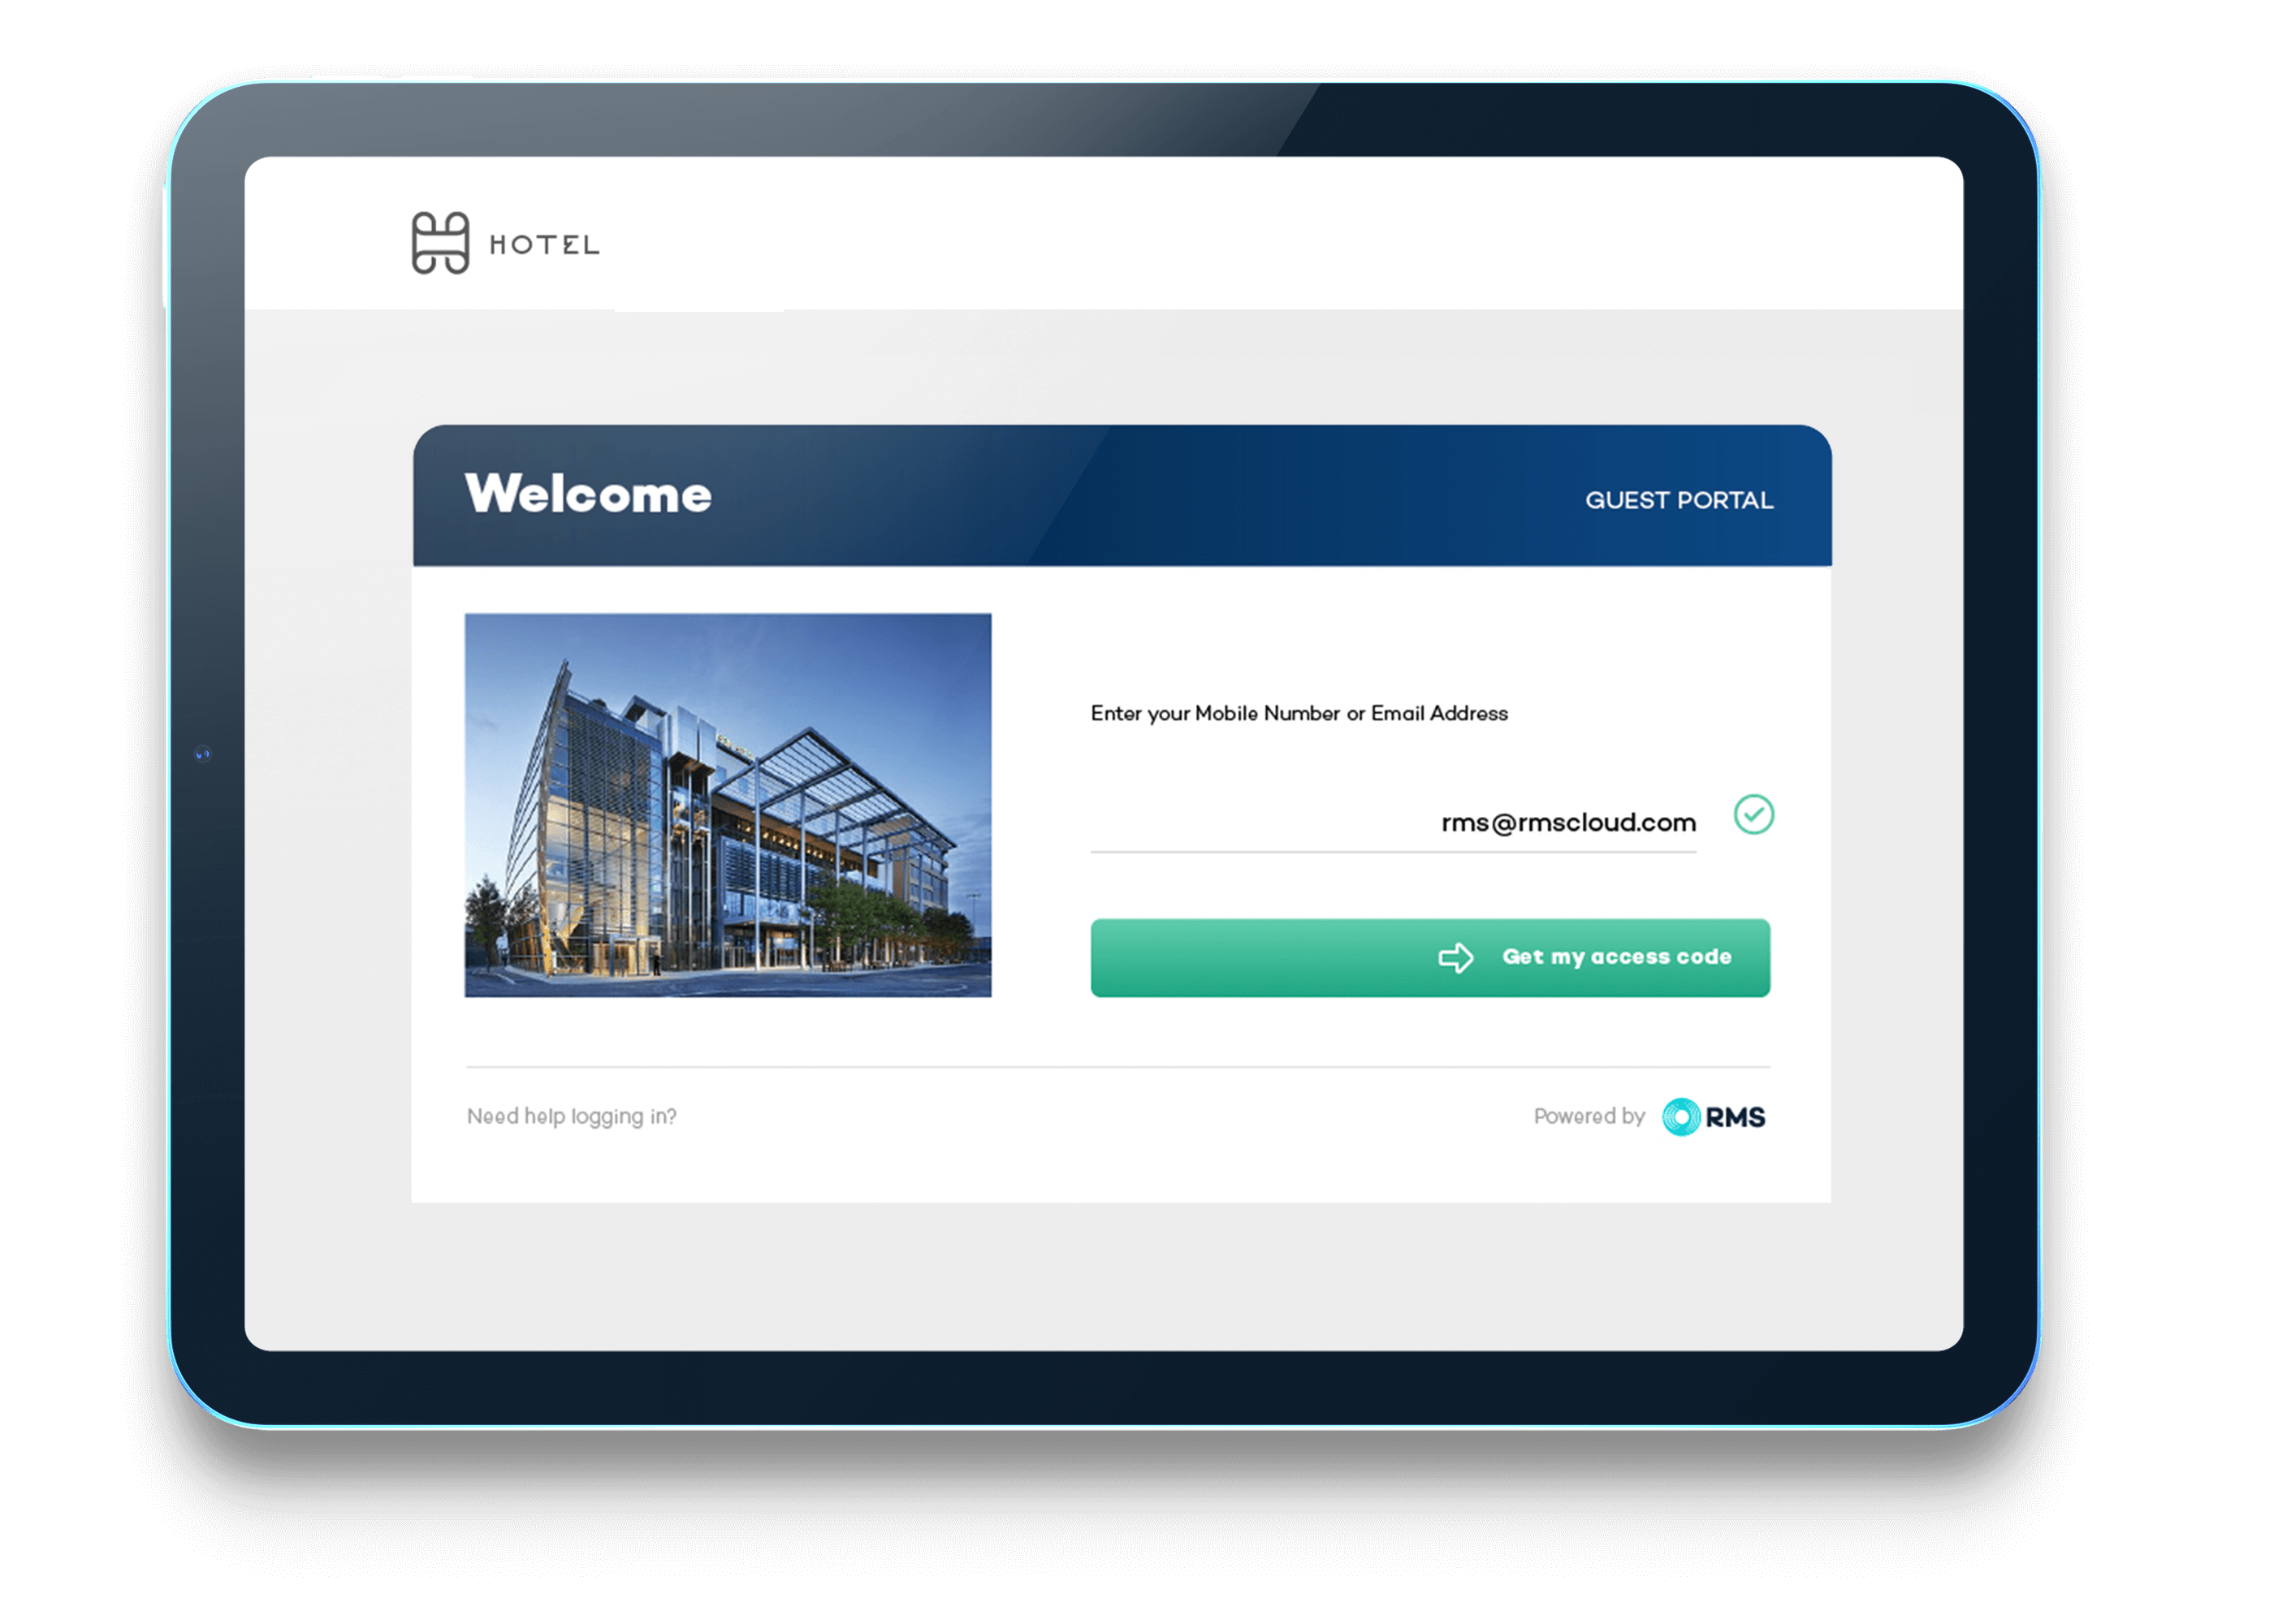 New look UI for our Guest Portal login screen